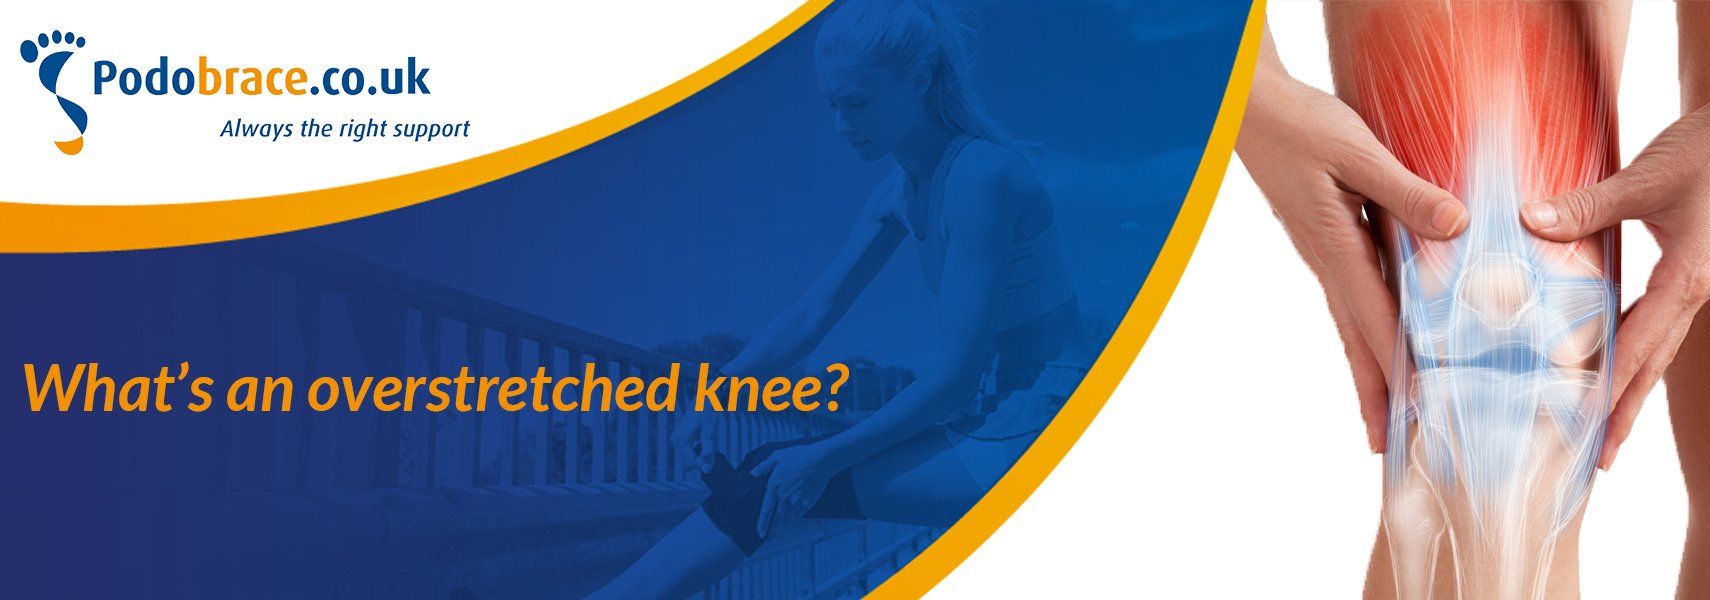 what's an overstreched knee